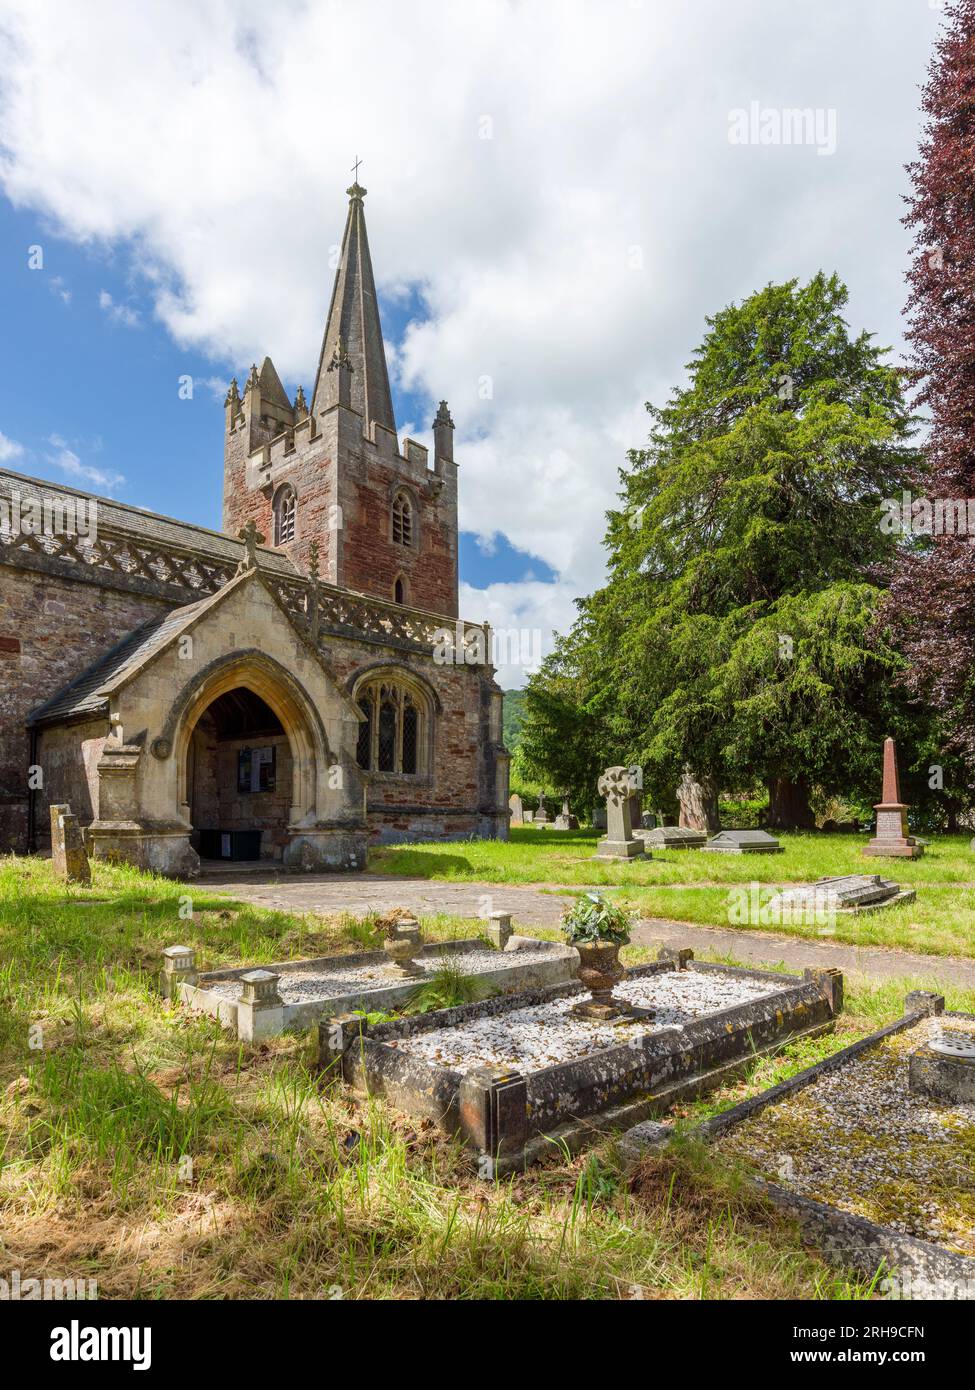 The Church of St Bartholomew in the village of Ubley in the Chew Valley, Bath and North East Somerset, England. Stock Photo